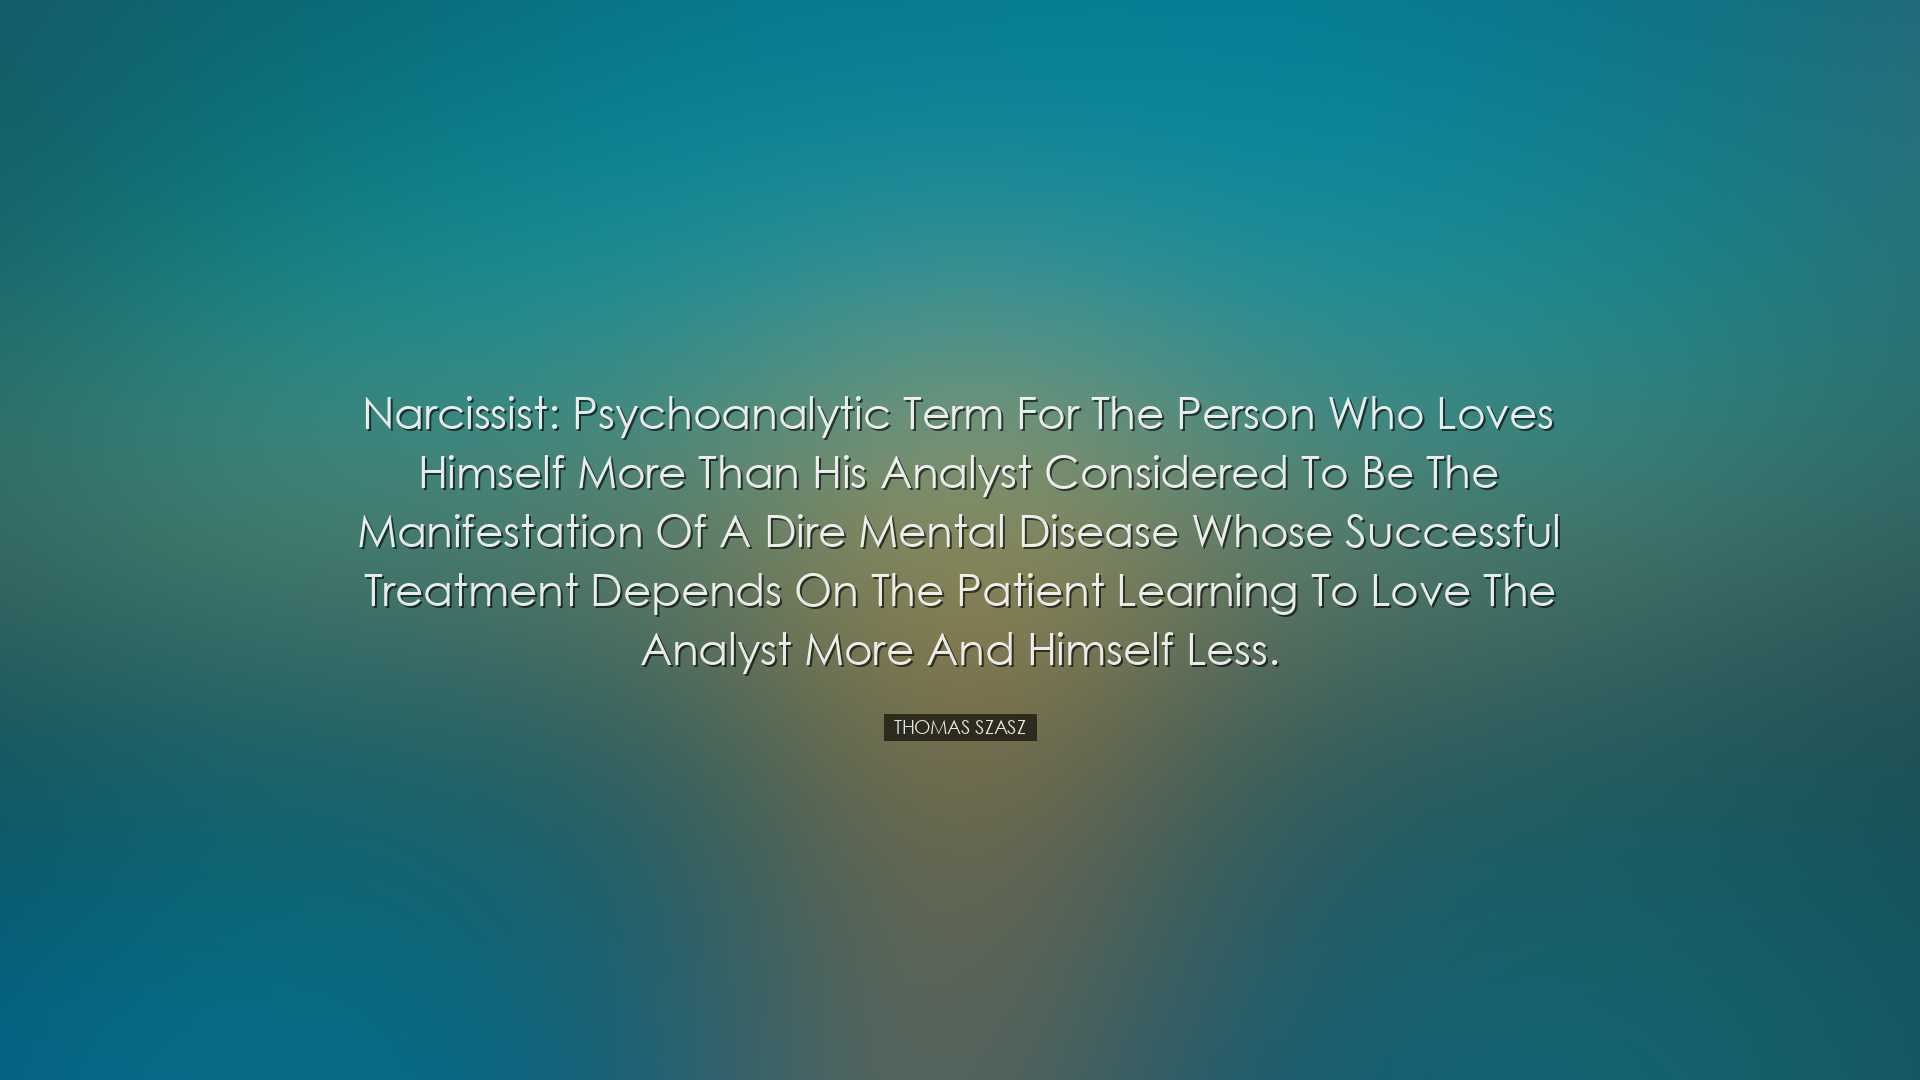 Narcissist: psychoanalytic term for the person who loves himself m